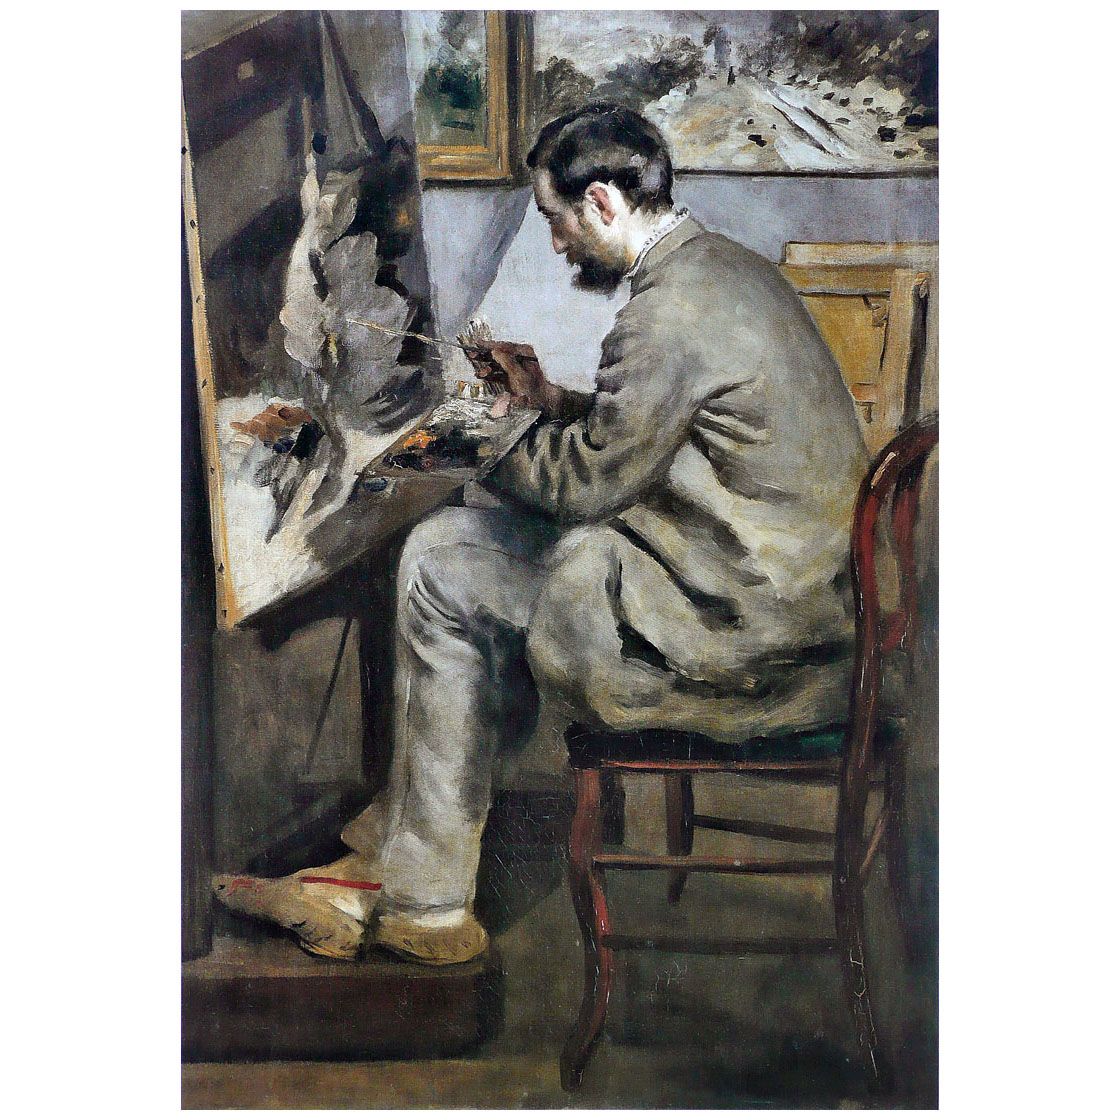 Pierre-Auguste Renoir. Frederic Bazille poignant a son chevalet. 1867. Musee Fabre, Montpellier